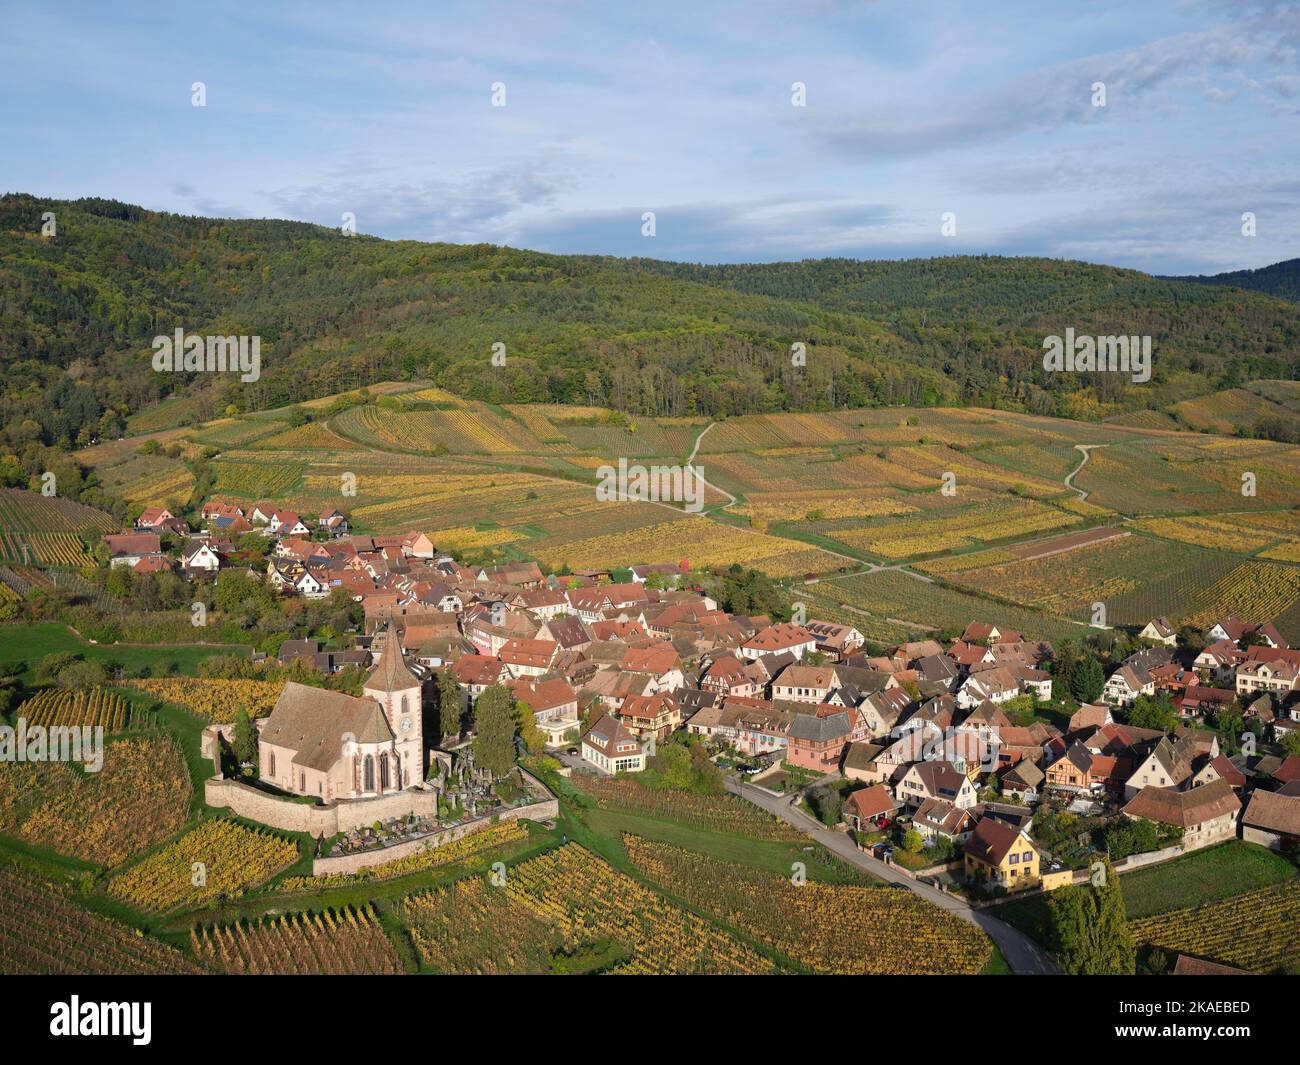 AERIAL VIEW. Picturesque village at the foothills of the Vosges Mountains with the vineyards in autumnal colors. Hunawihr, Alsace, Grand Est, France. Stock Photo